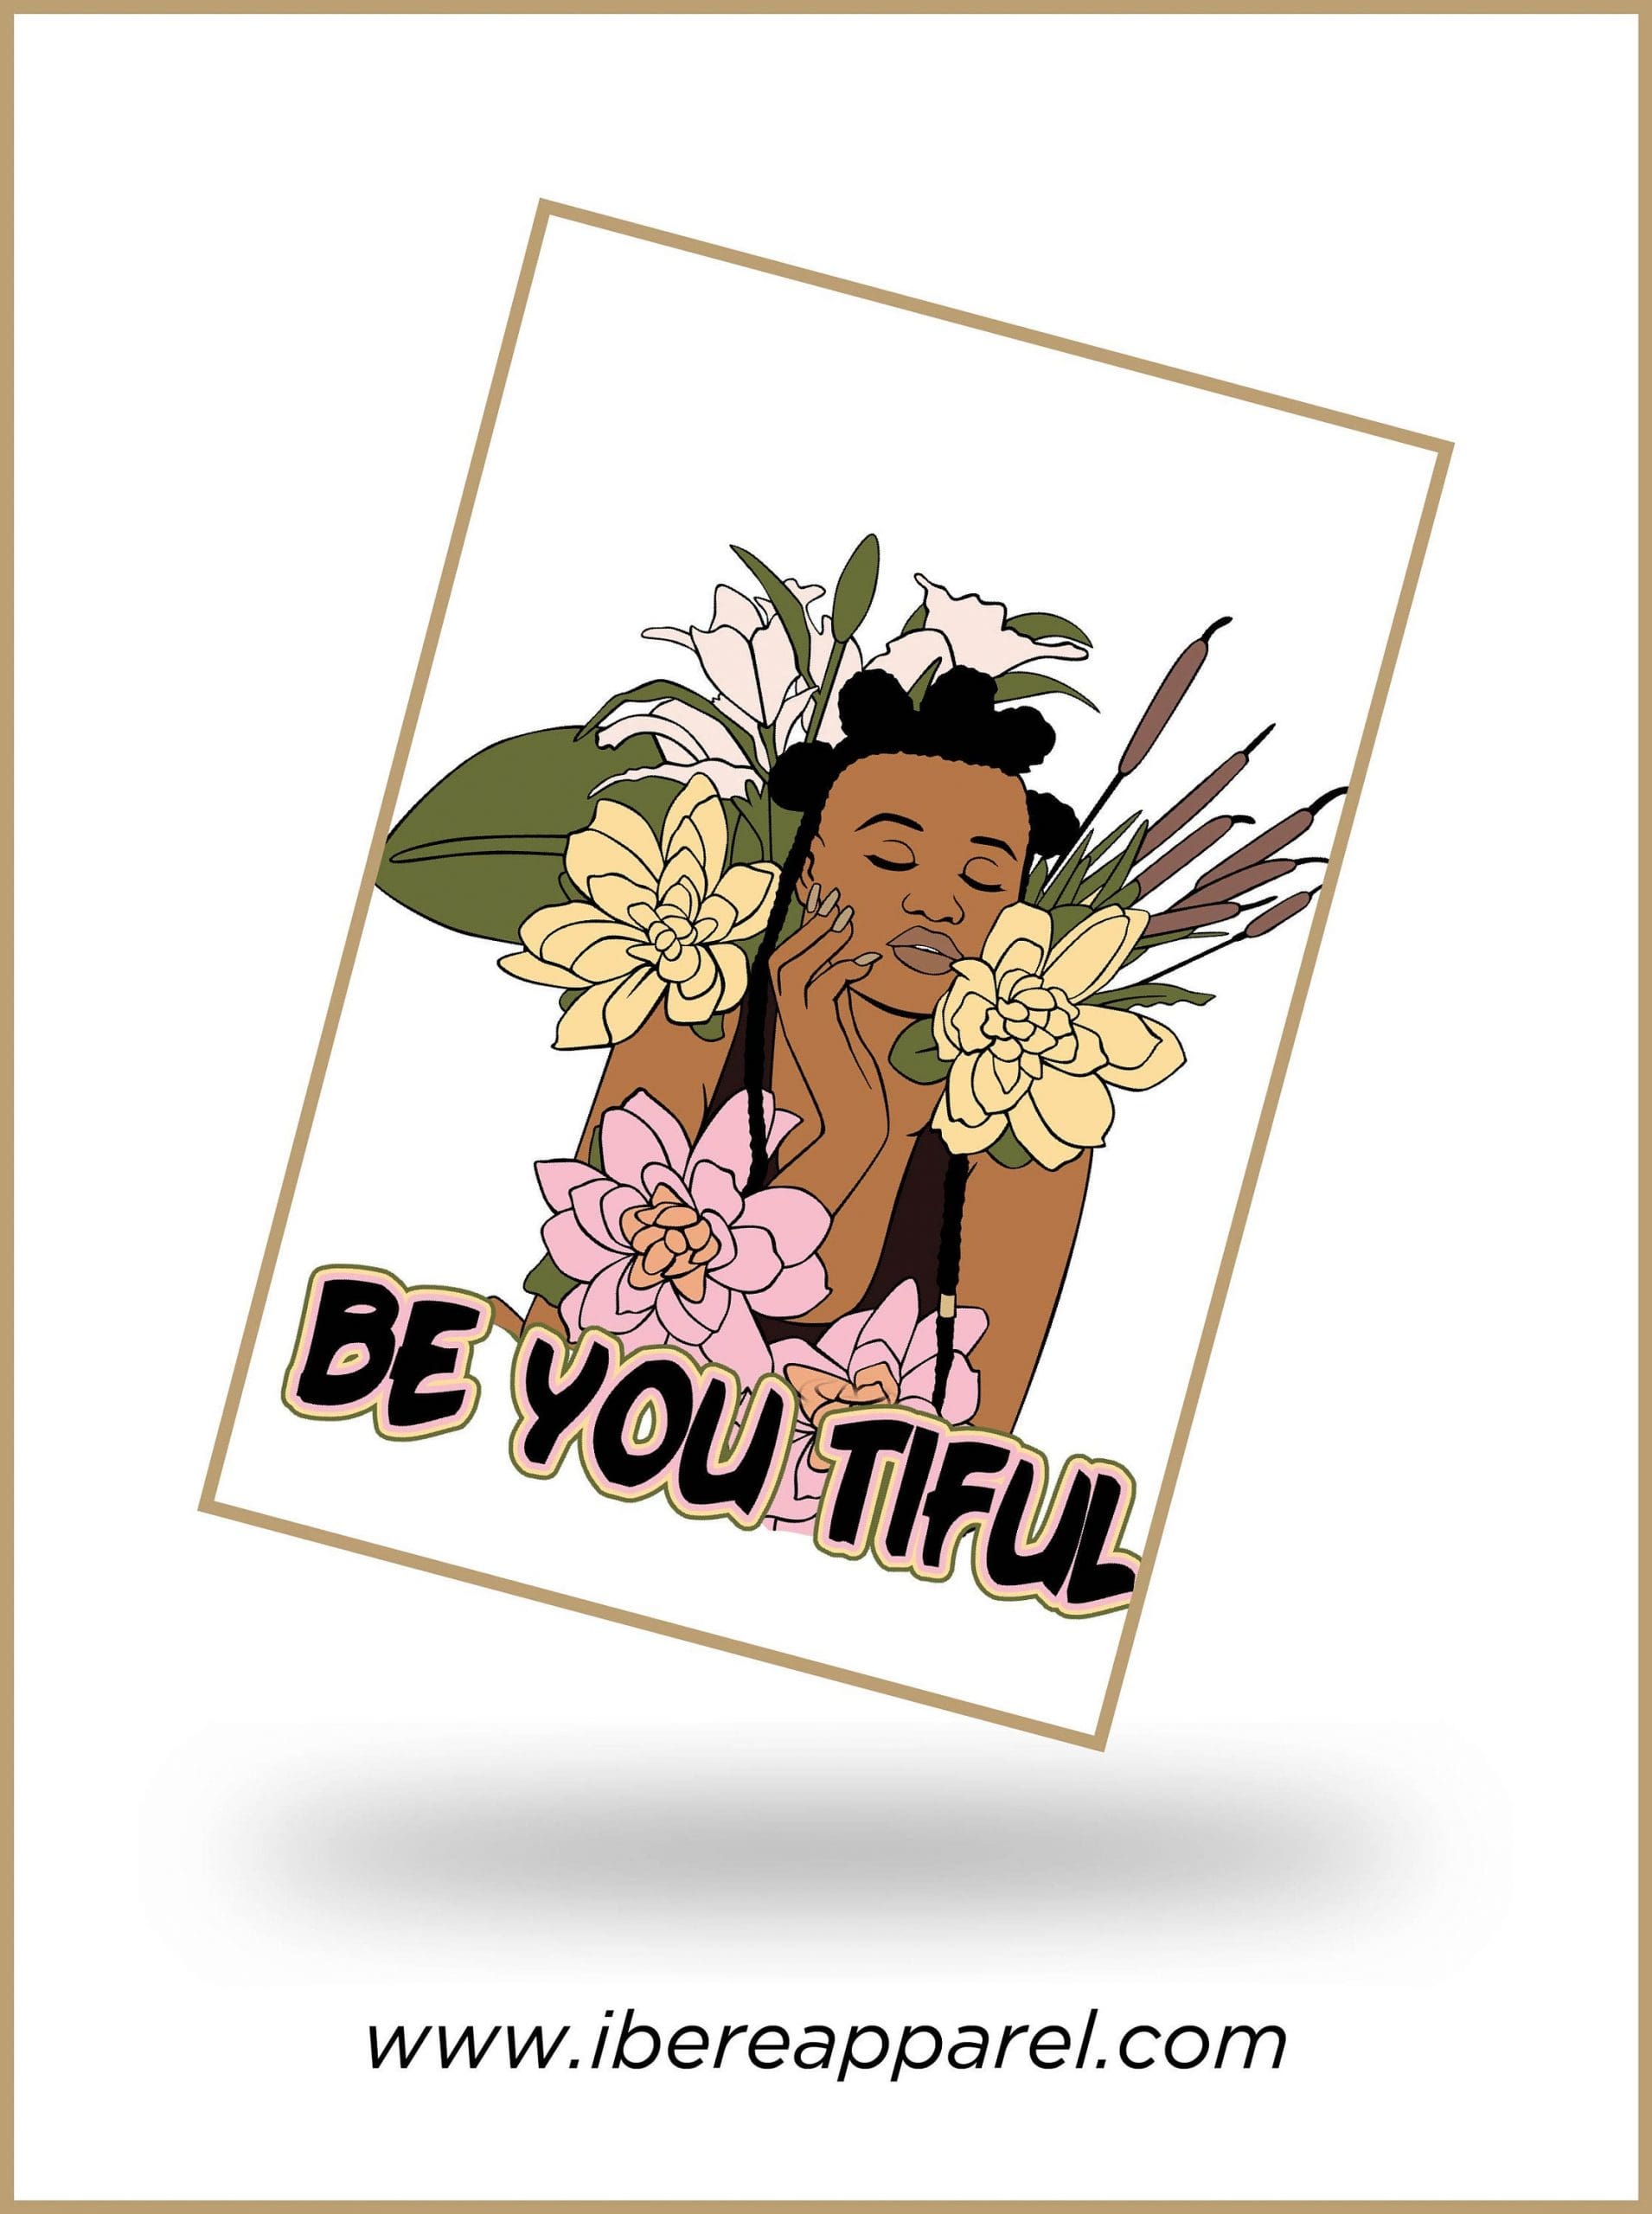 BE YOU TIFUL Card,wakuda, african print fans, black-owned brands, black pound day